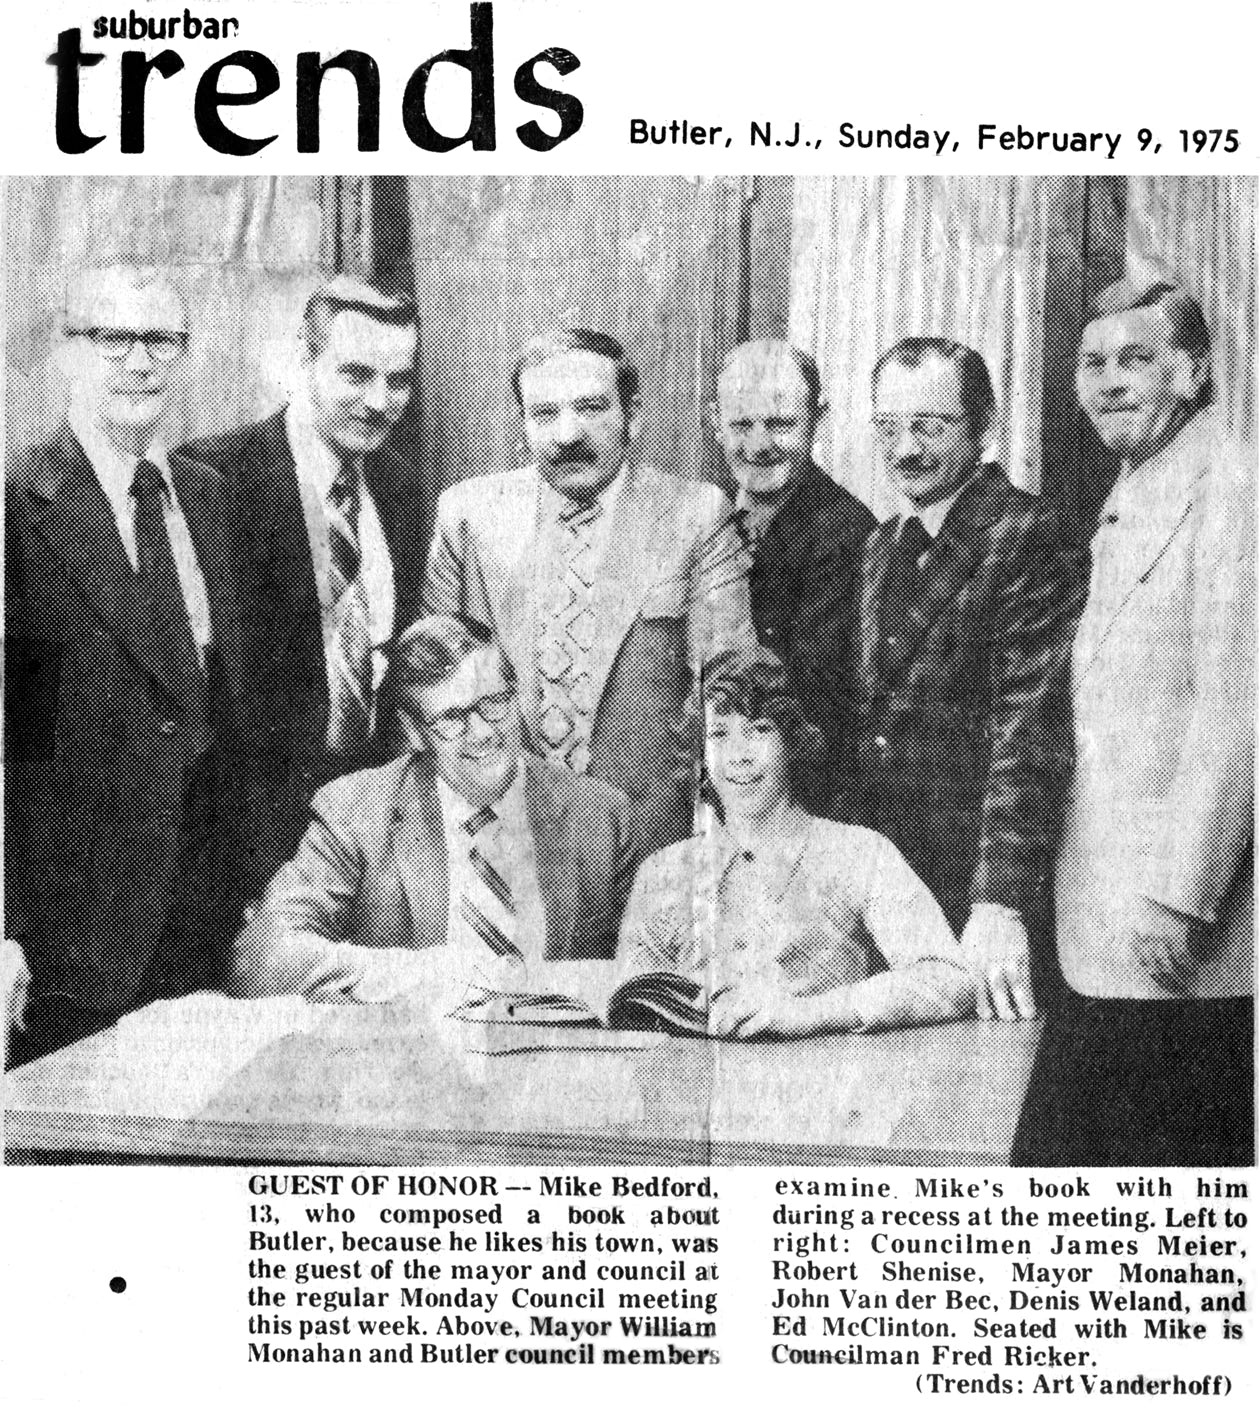 Photographer Mike Bedford meeting the Butler NJ mayor and council, 1975